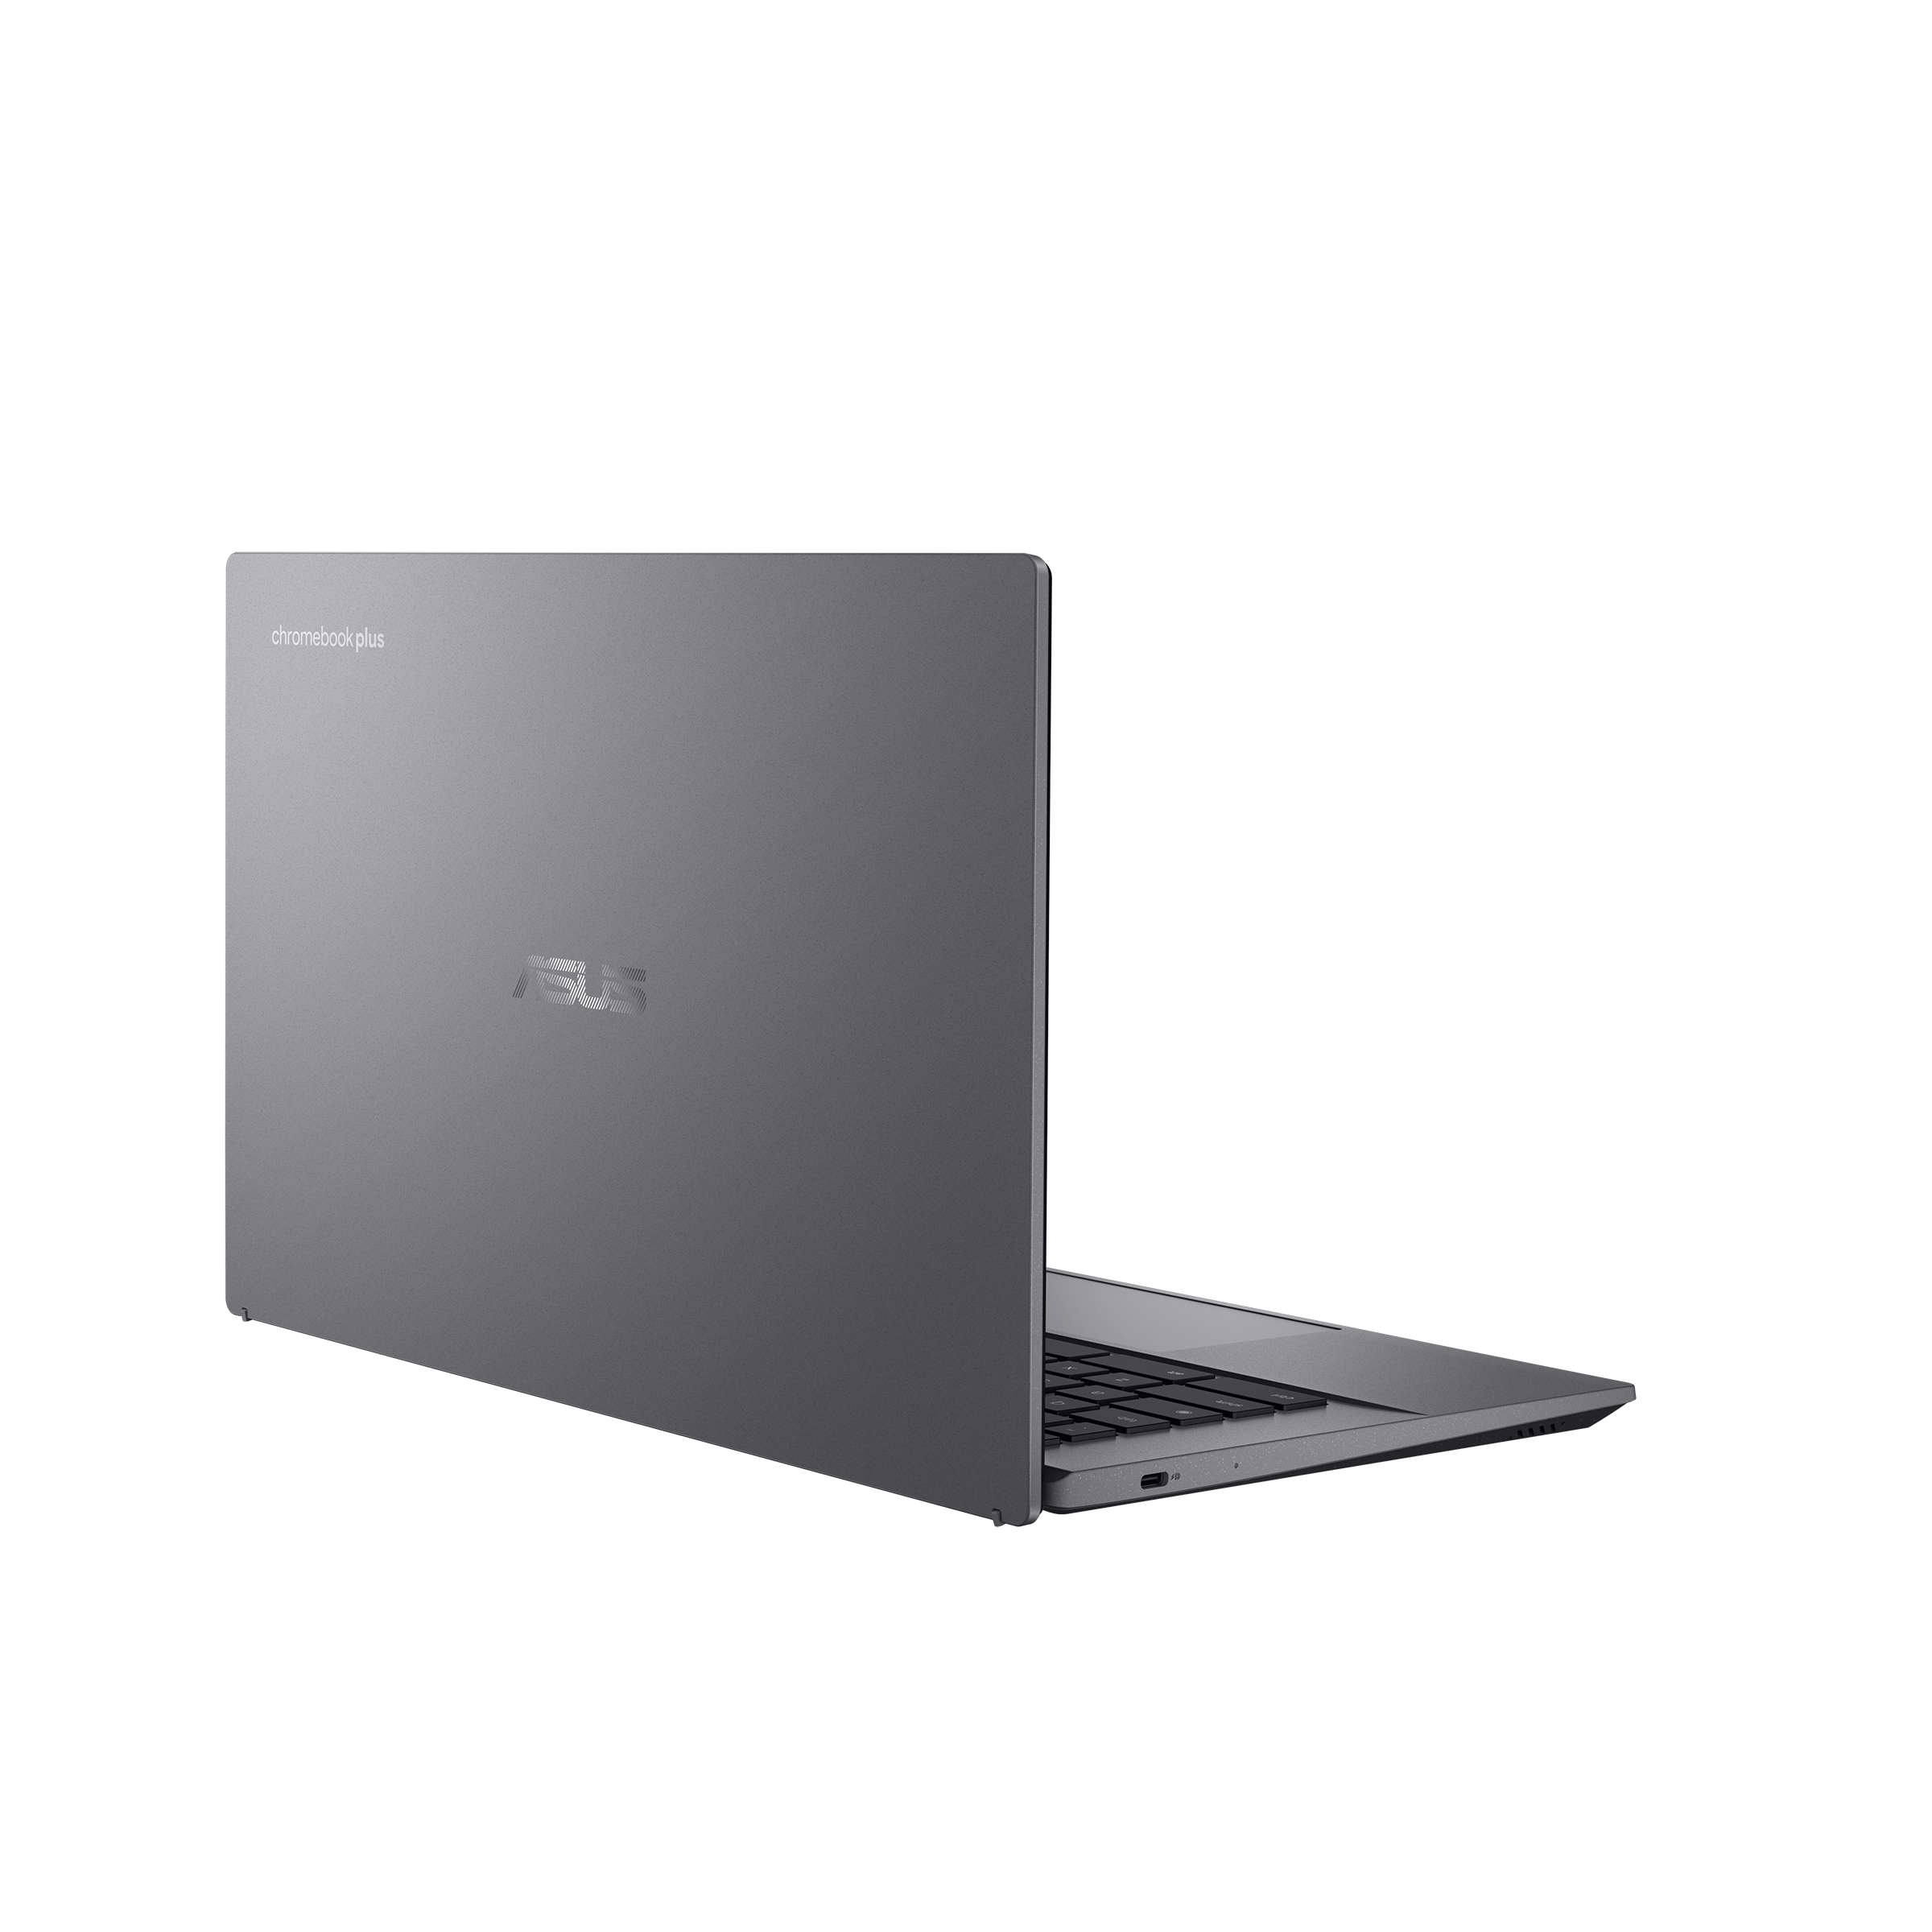 ASUS Chromebook Plus CX34 (CX3402)｜Laptops For Home｜ASUS USA